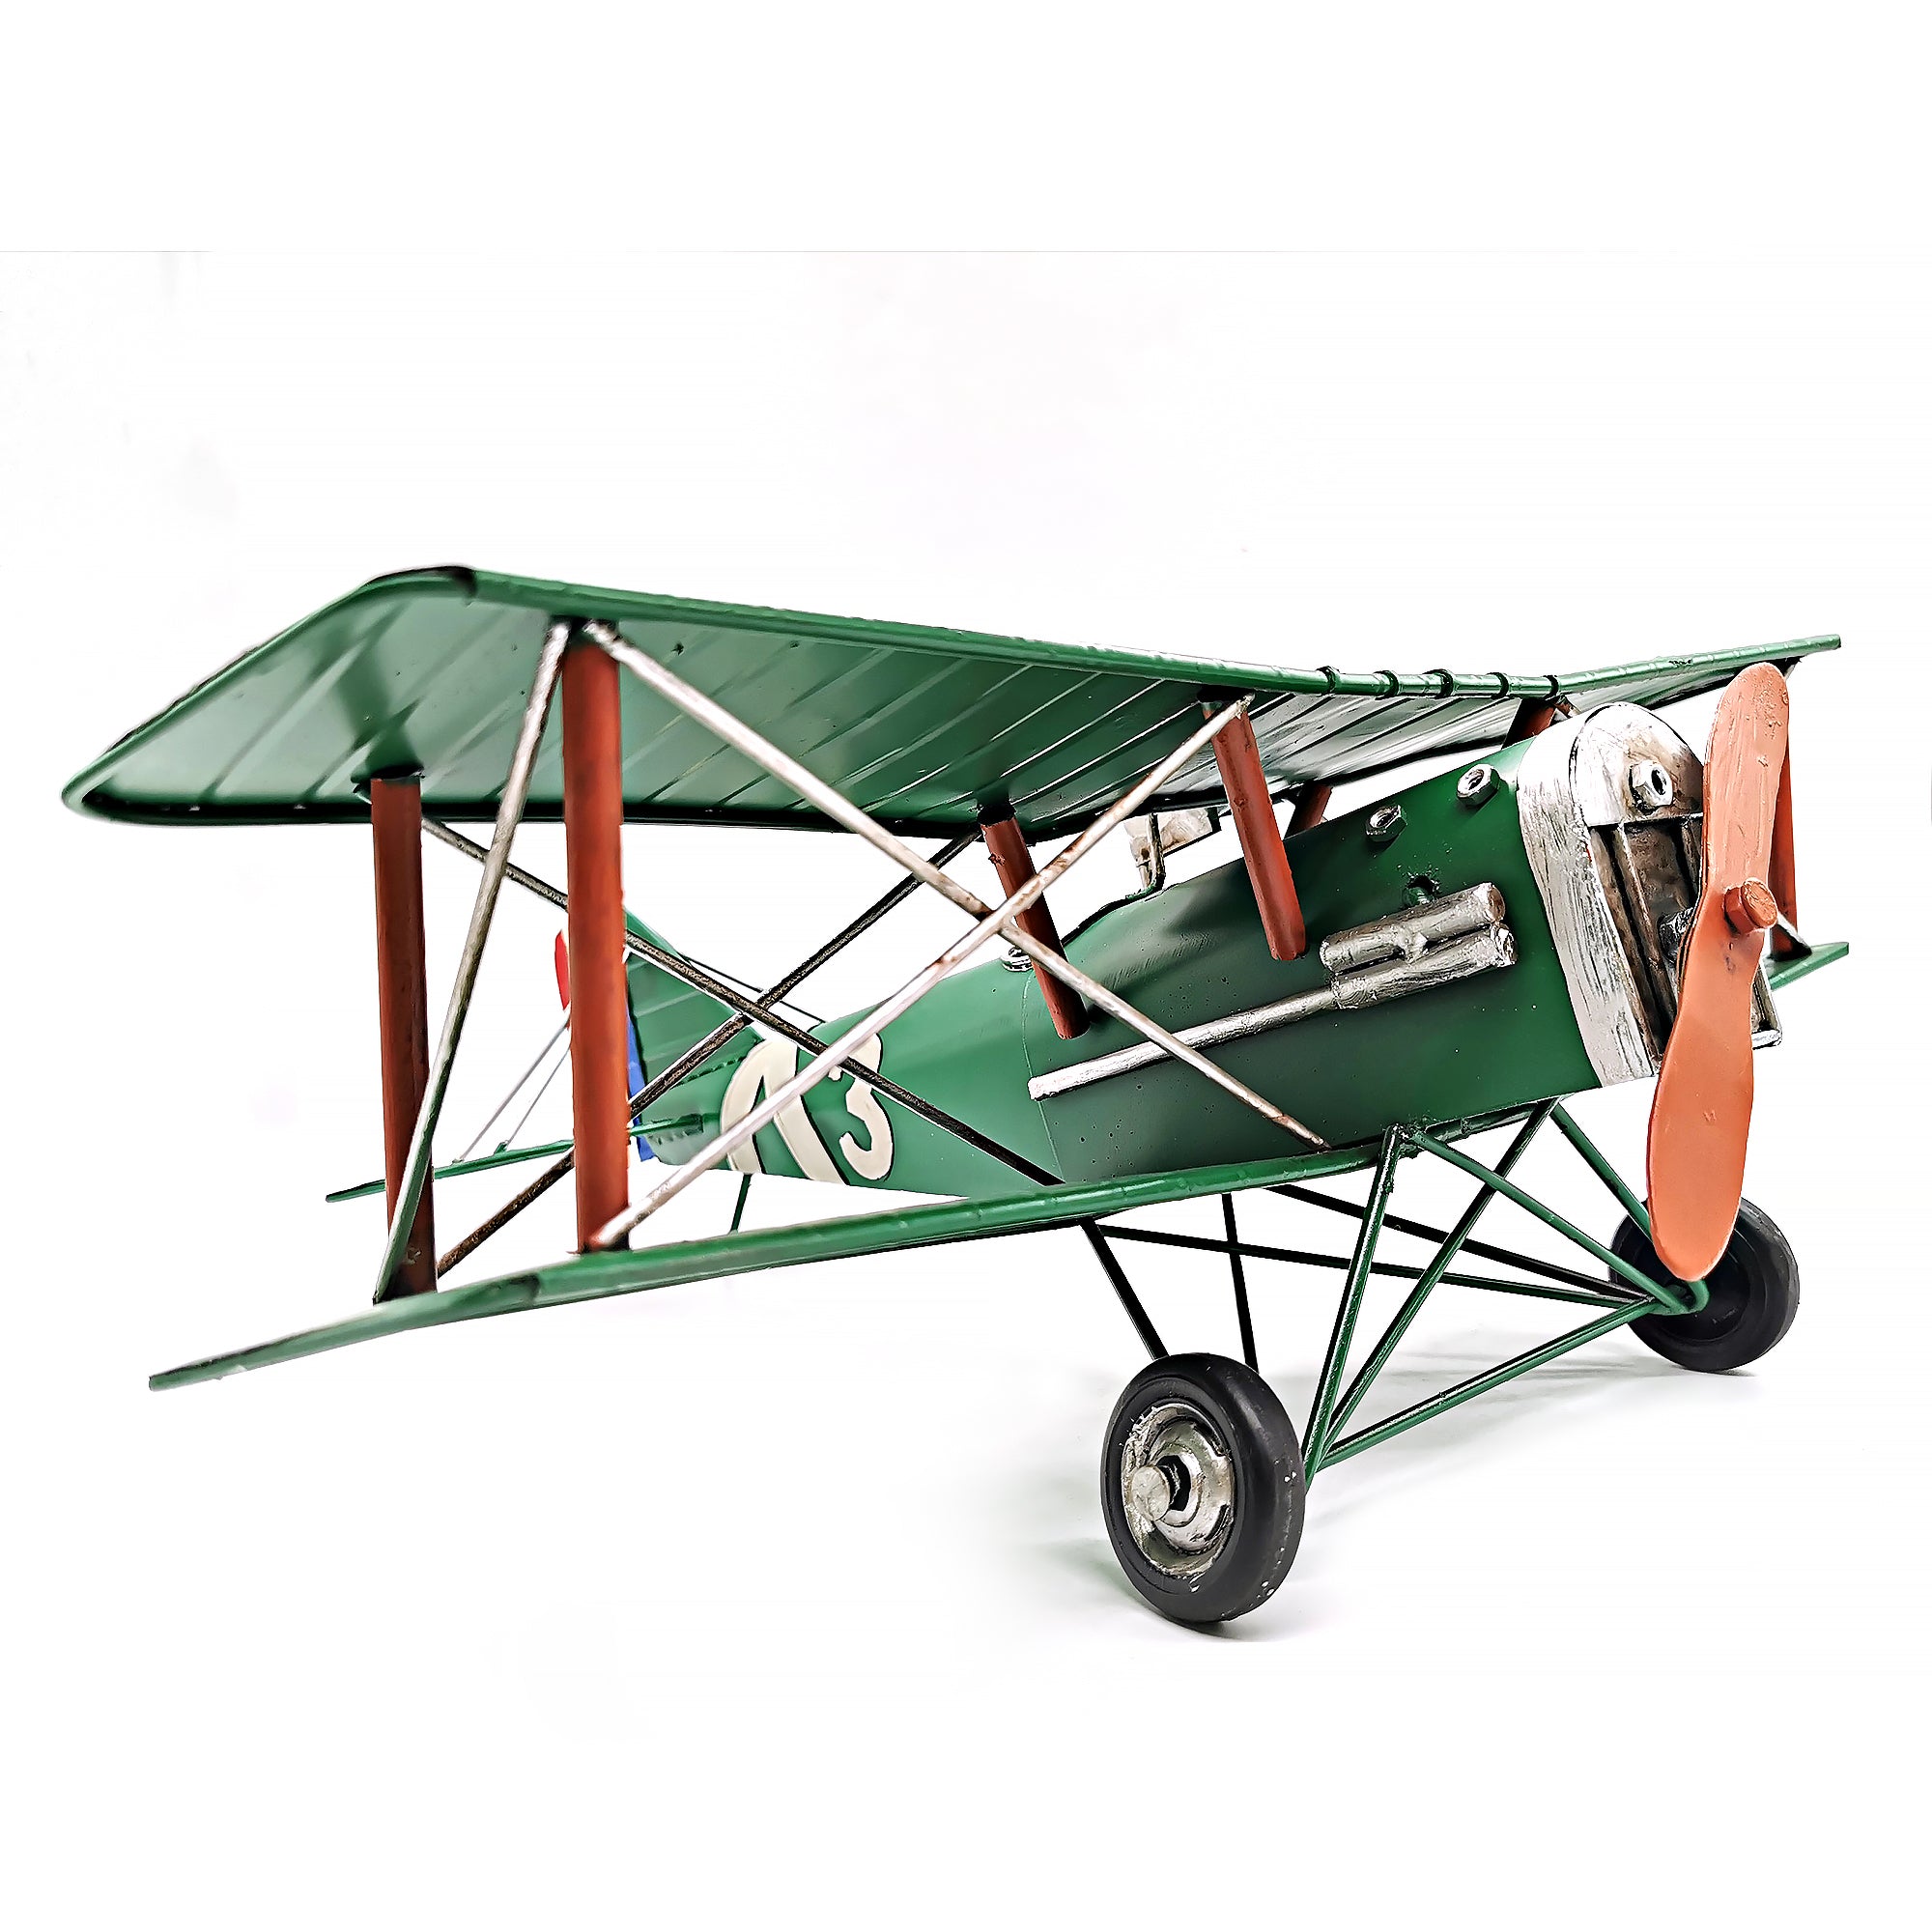 WWI Fighter Model Airplane